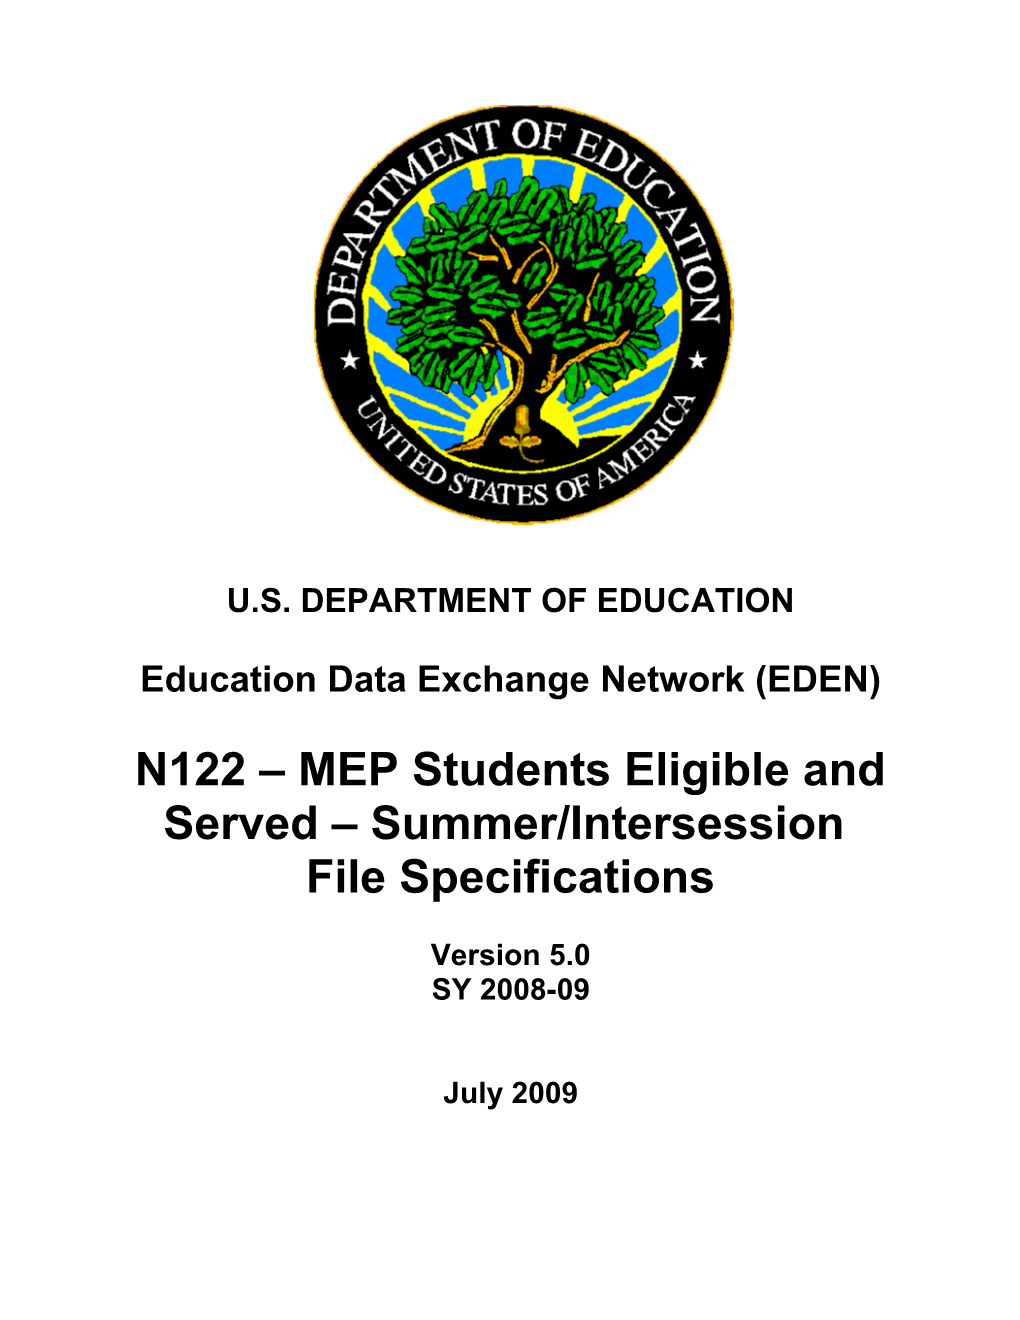 N122 MEP Students Eligible and Served Summer/Intersession File Specifications (MS Word)